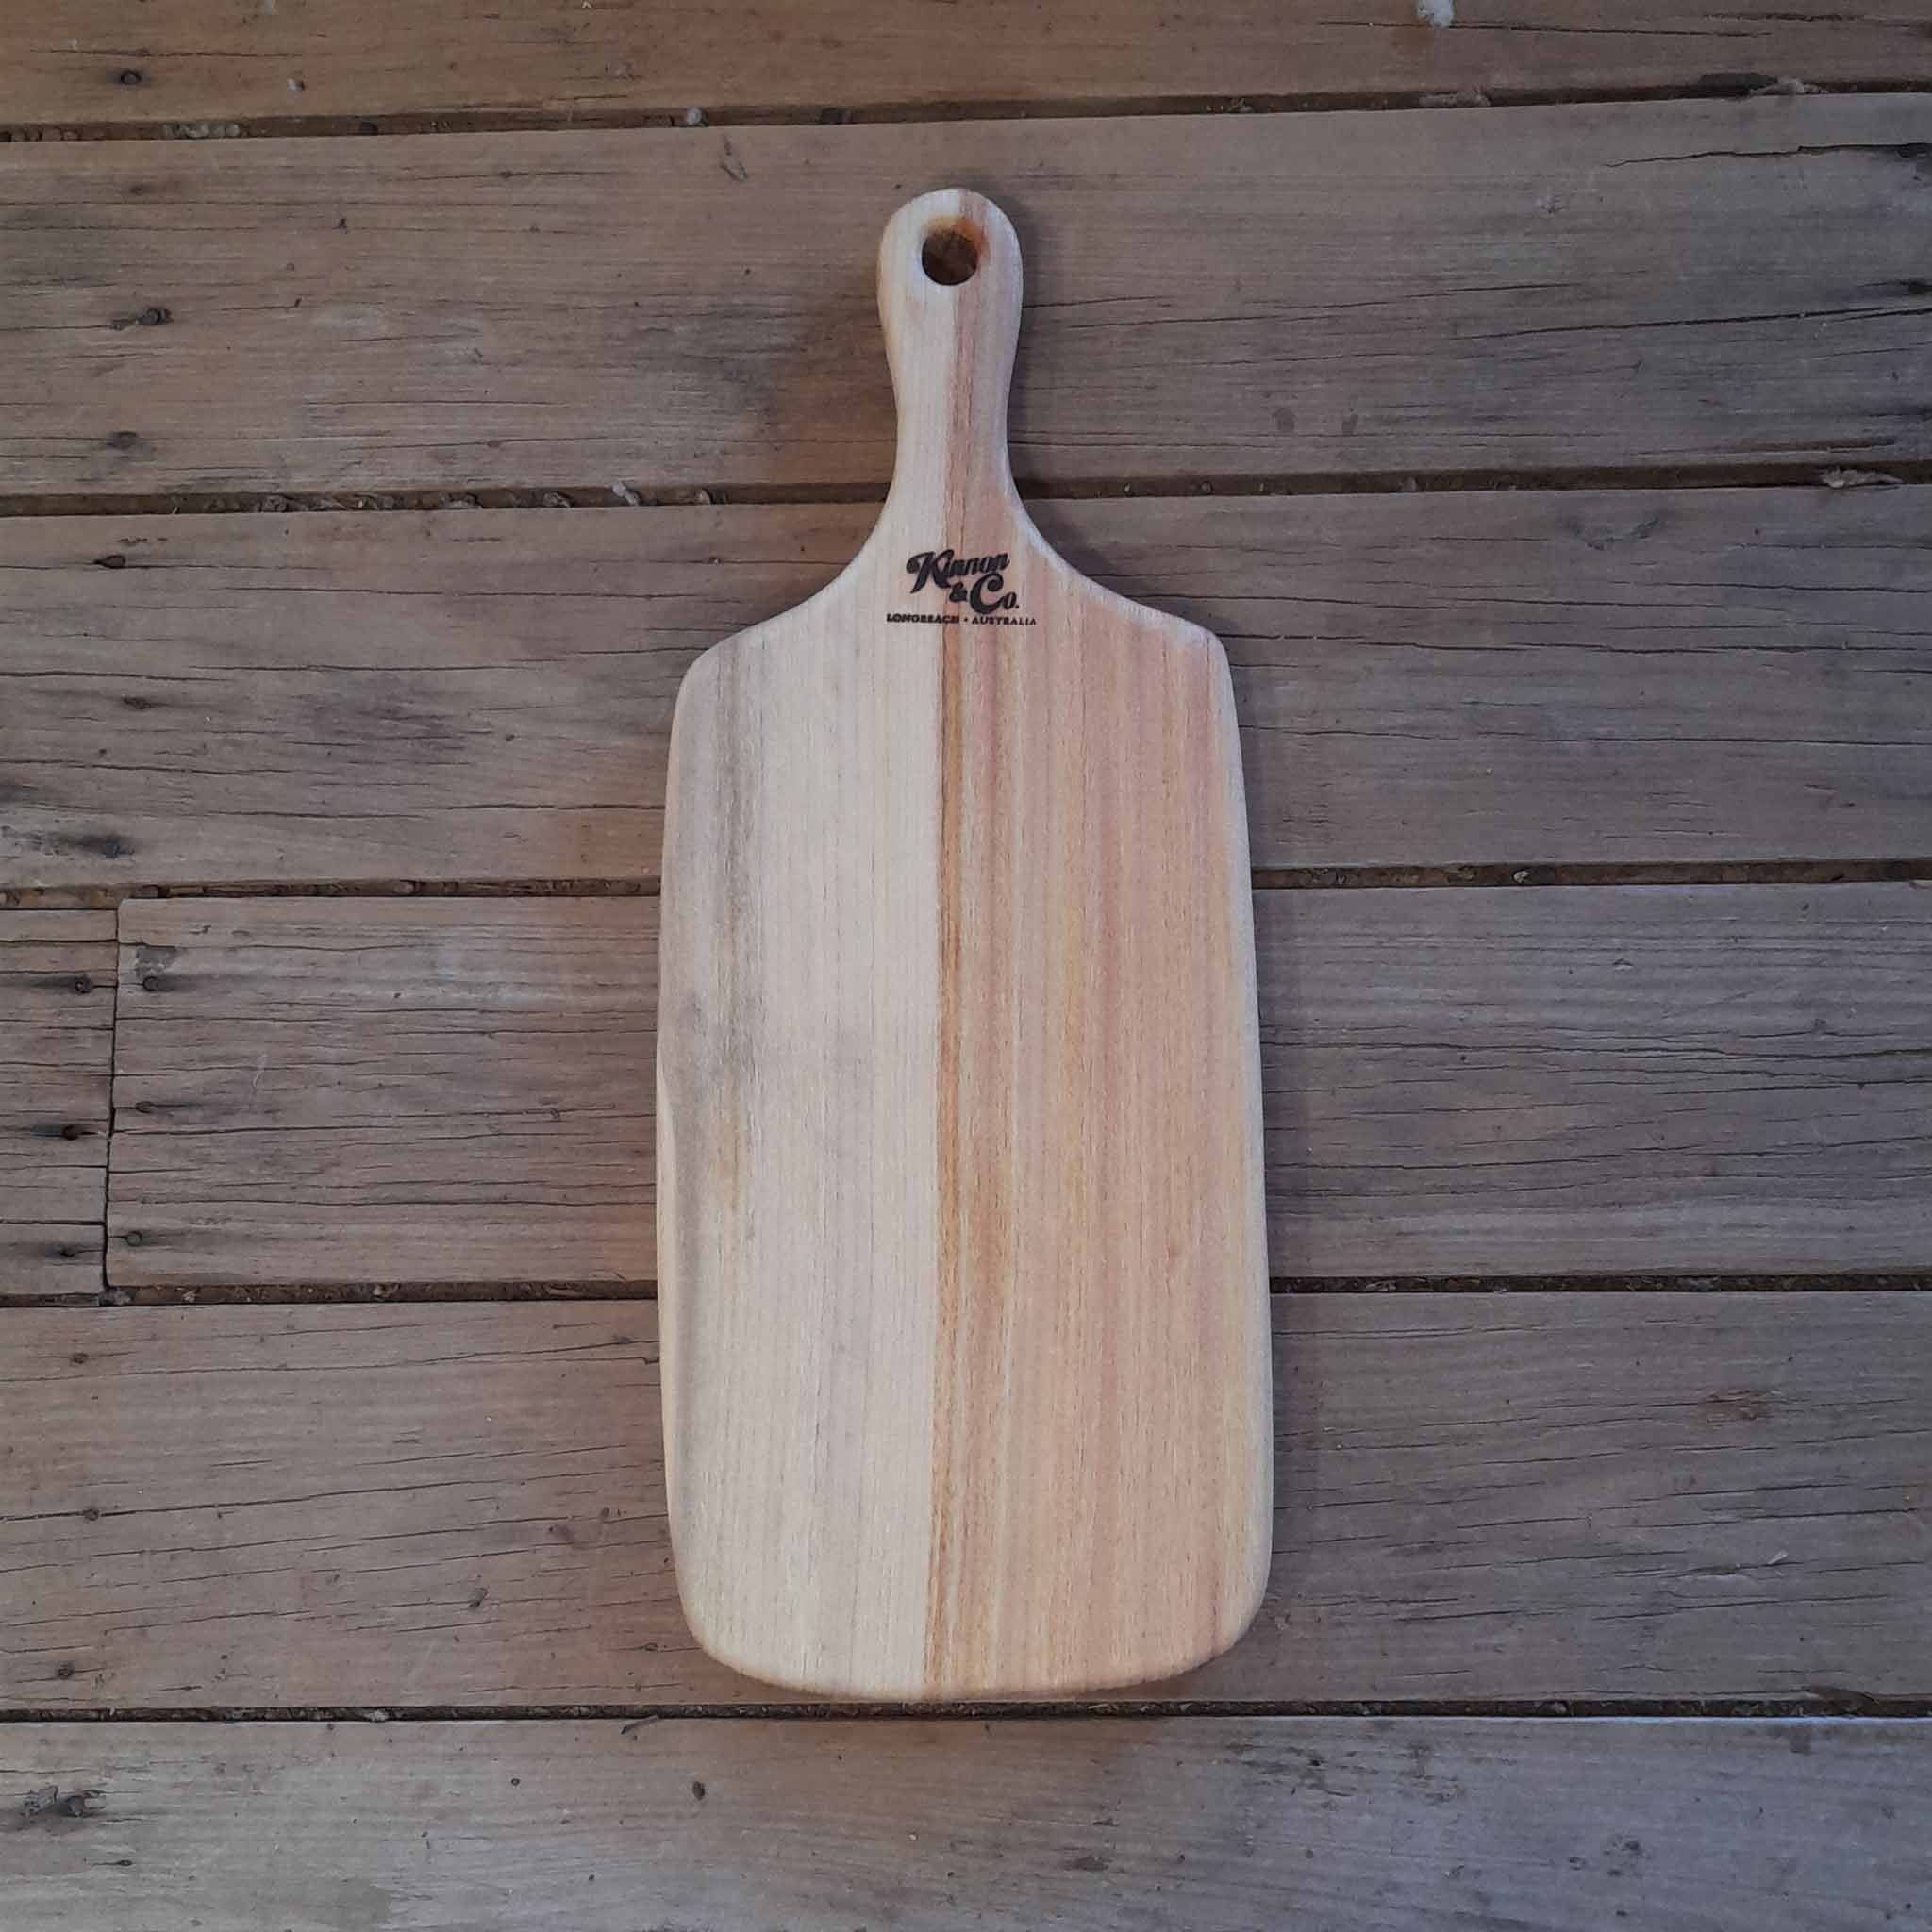 Kinnon and Co branded Large Camphor Laurel Paddle Board with hole 